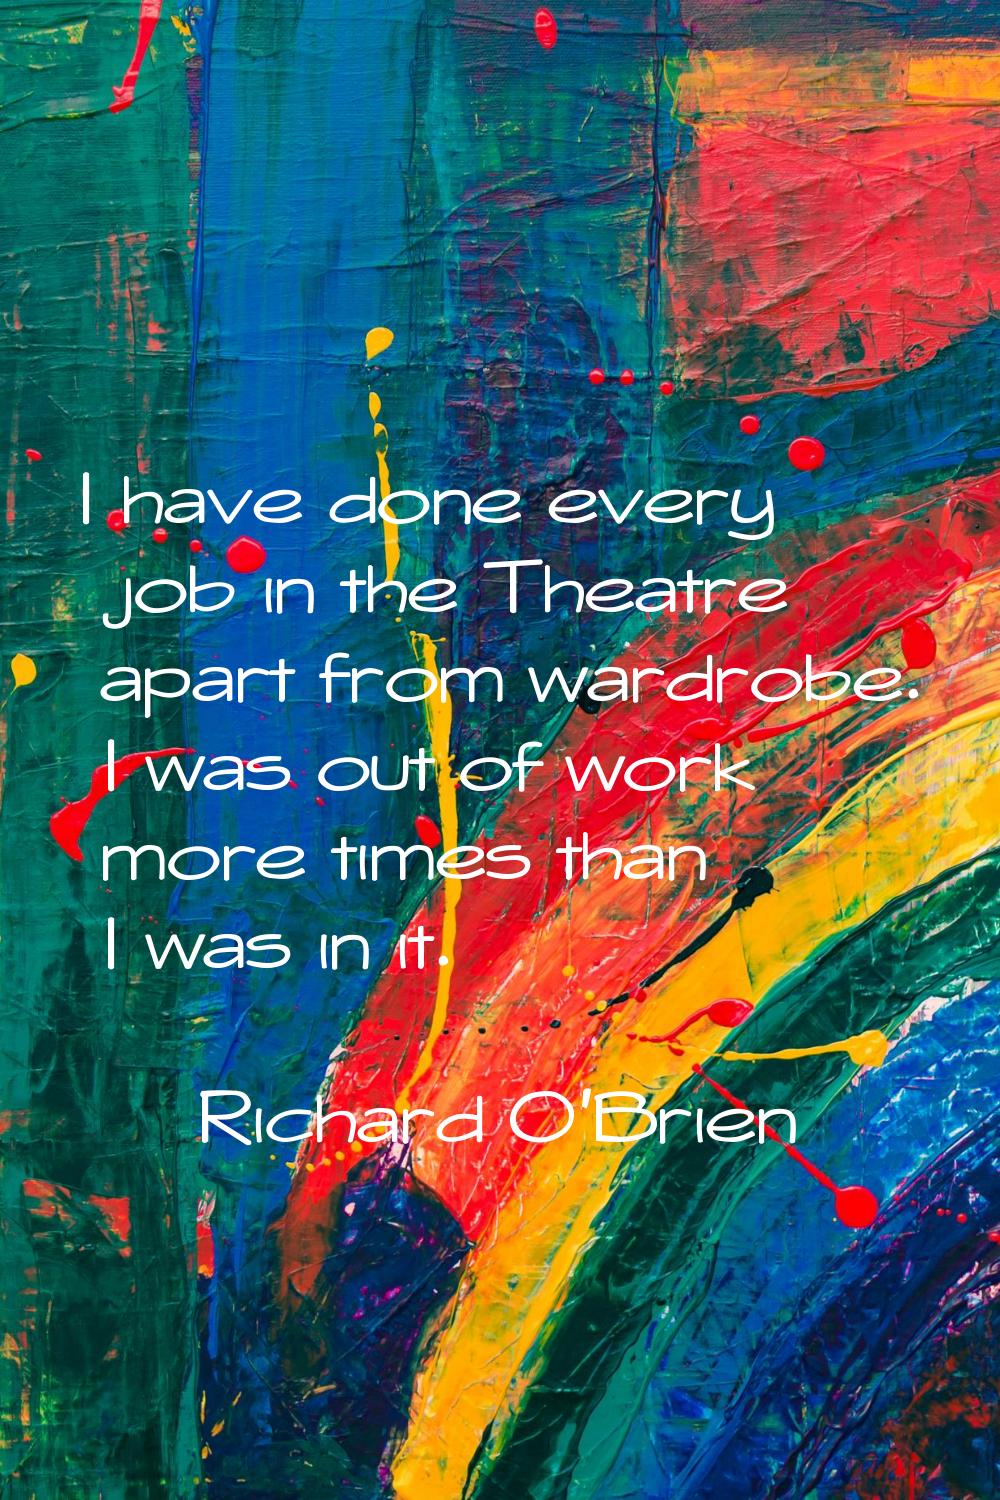 I have done every job in the Theatre apart from wardrobe. I was out of work more times than I was i